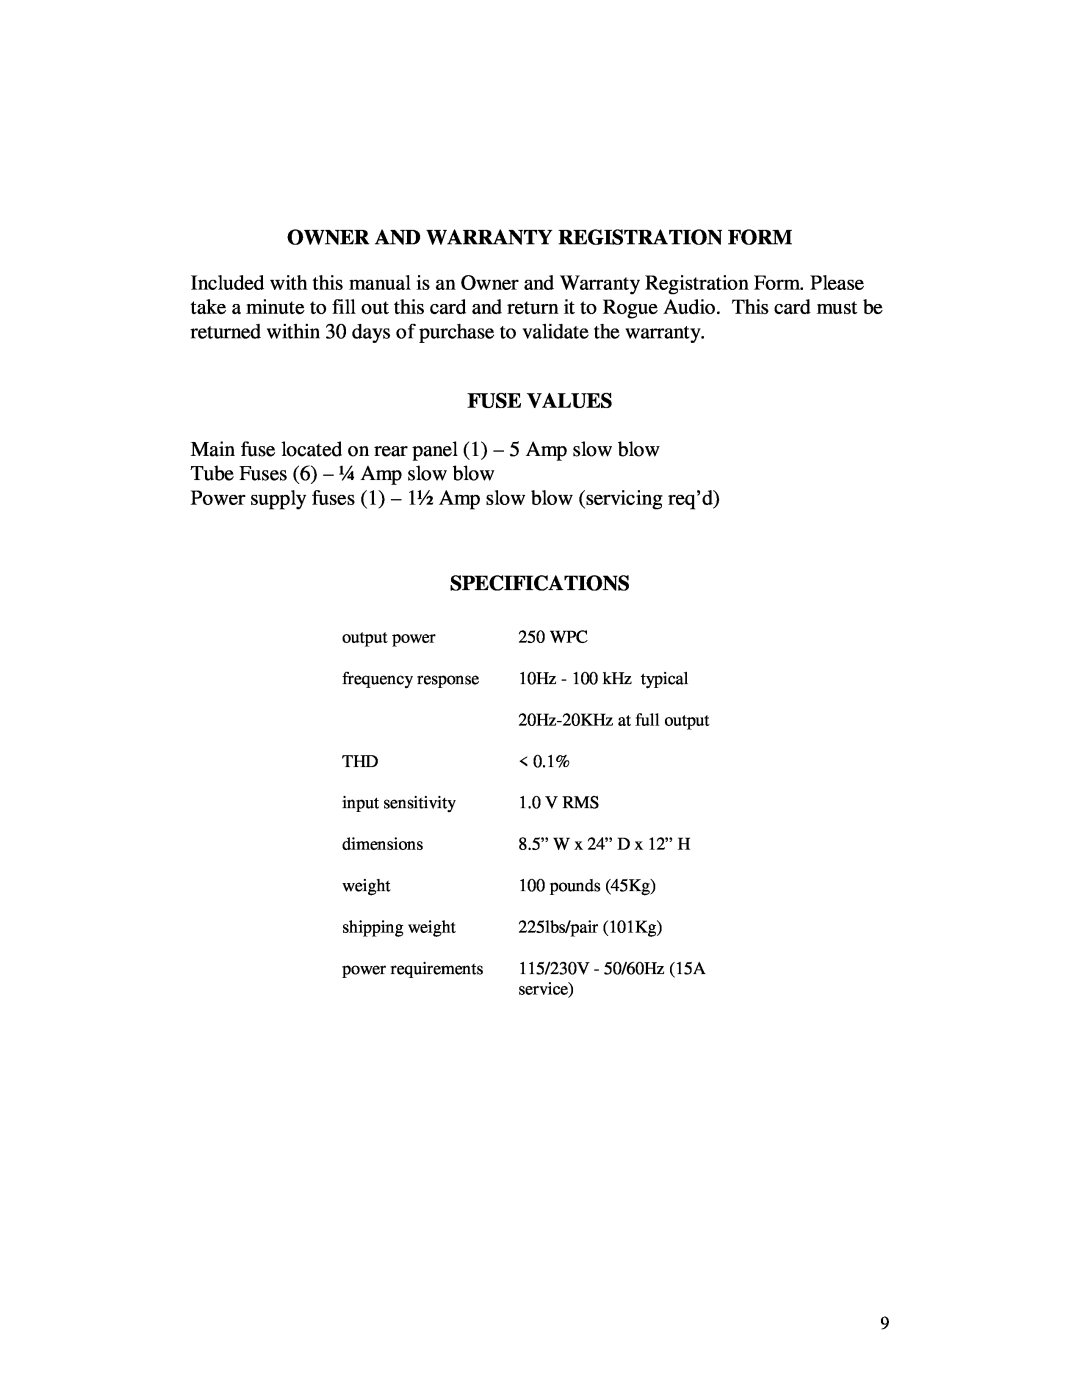 Apollo 645-062 owner manual Owner And Warranty Registration Form, Fuse Values, Specifications 